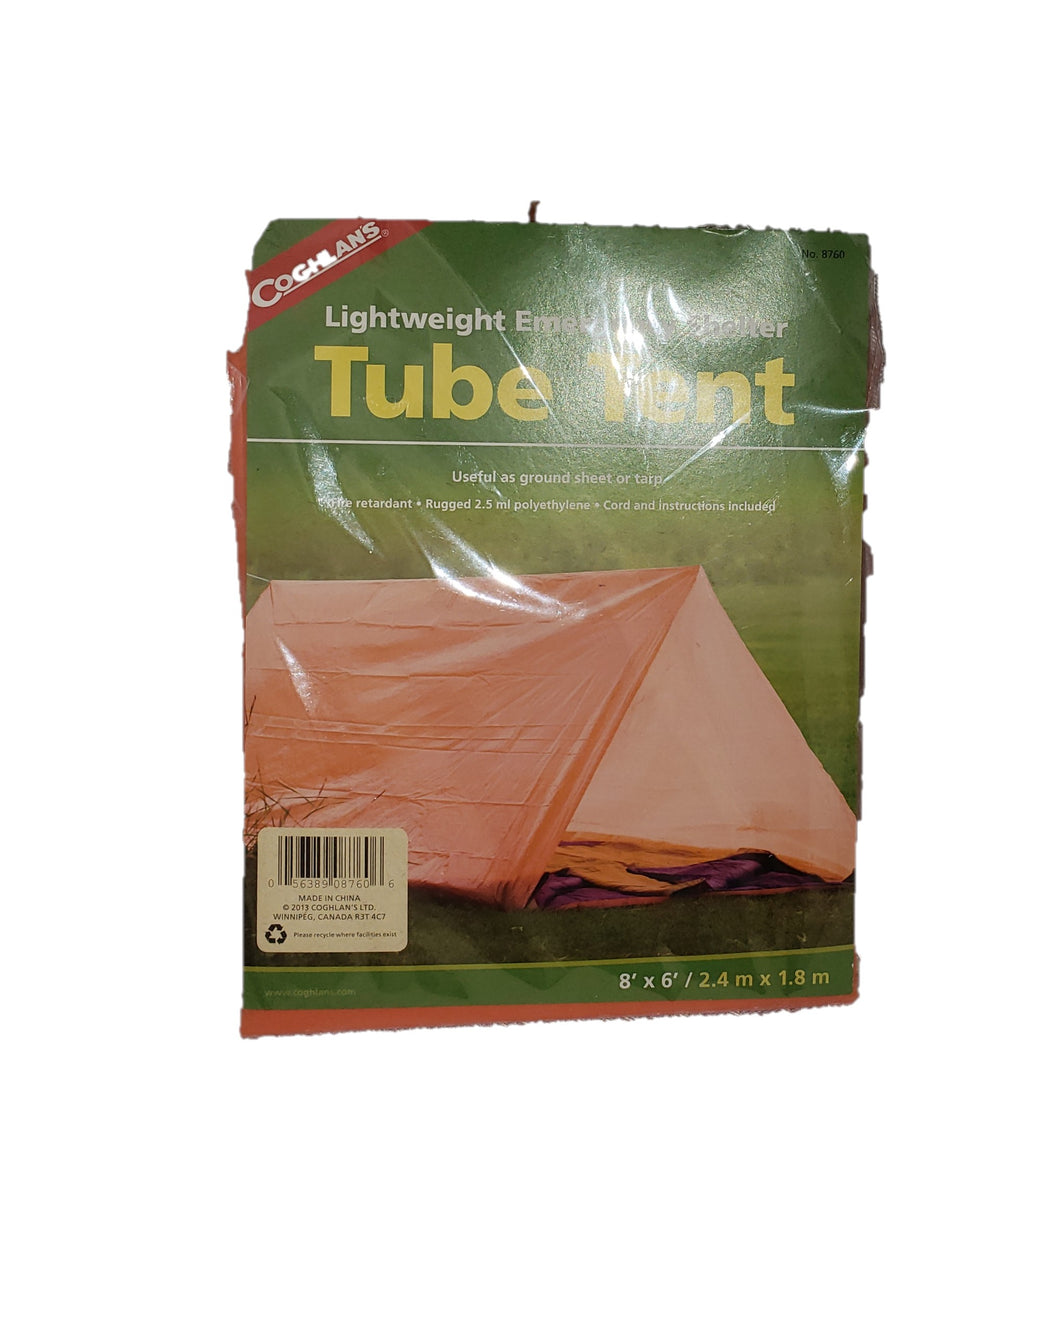 Coghlan's Emergency 2-Person Tube Tent Camping Shelter Tarp Coghlans 8760